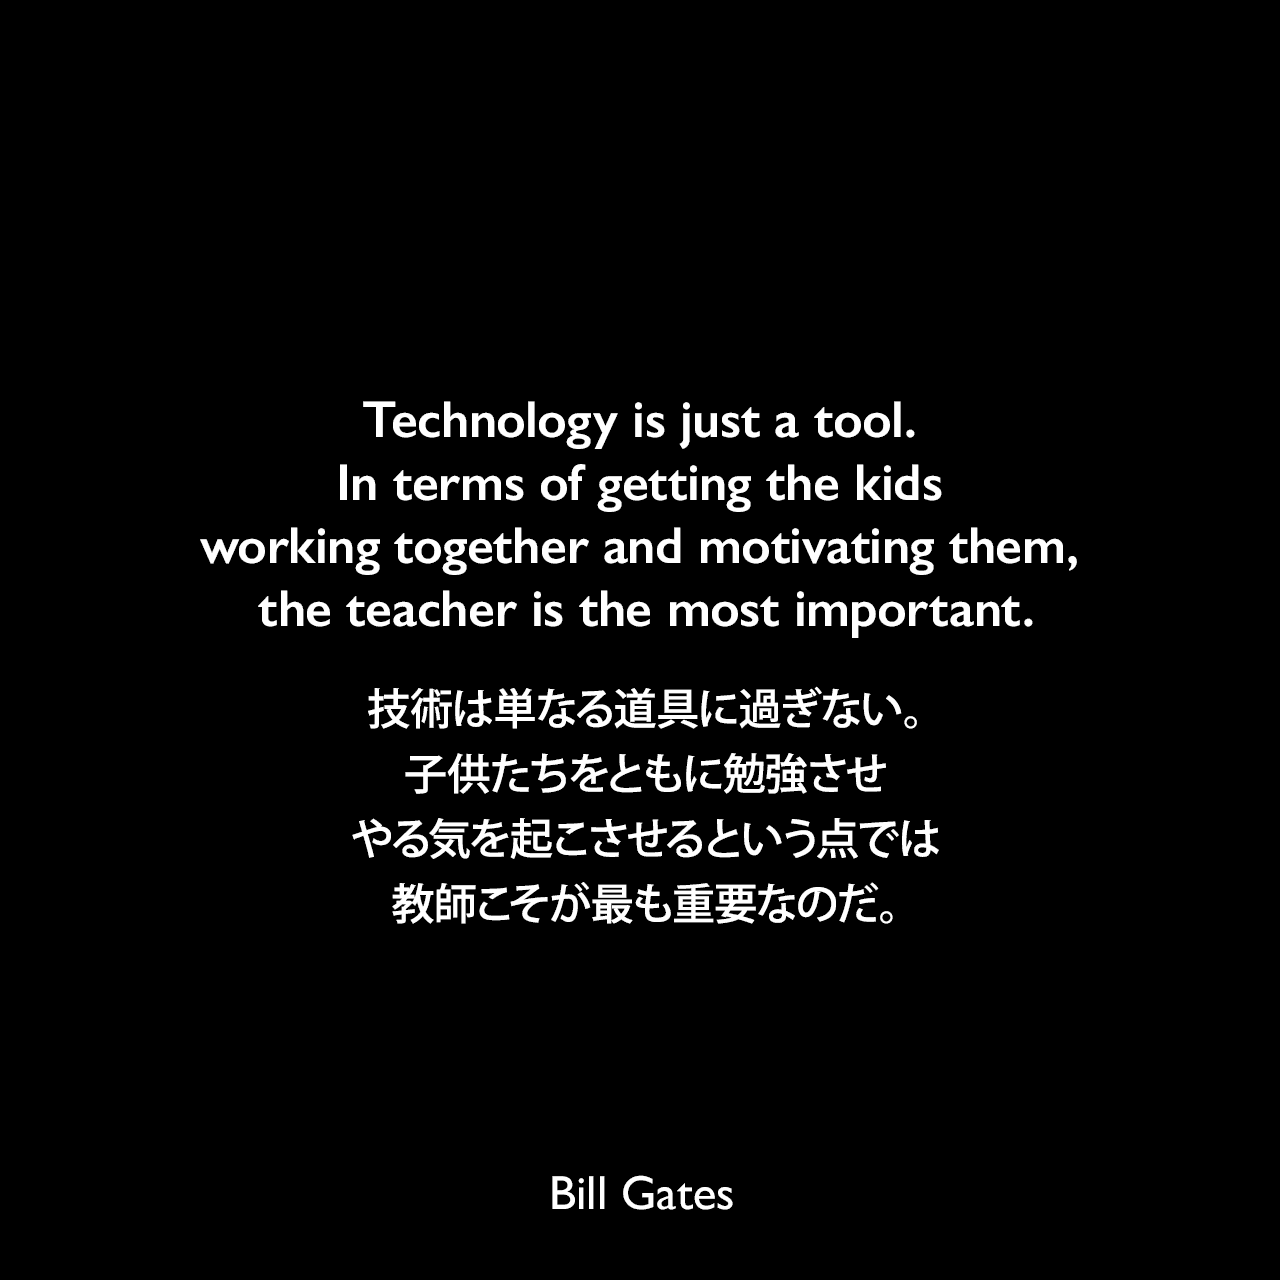 Technology is just a tool. In terms of getting the kids working together and motivating them, the teacher is the most important.技術は単なる道具に過ぎない。子供たちをともに勉強させやる気を起こさせるという点では、教師こそが最も重要なのだ。Bill Gates